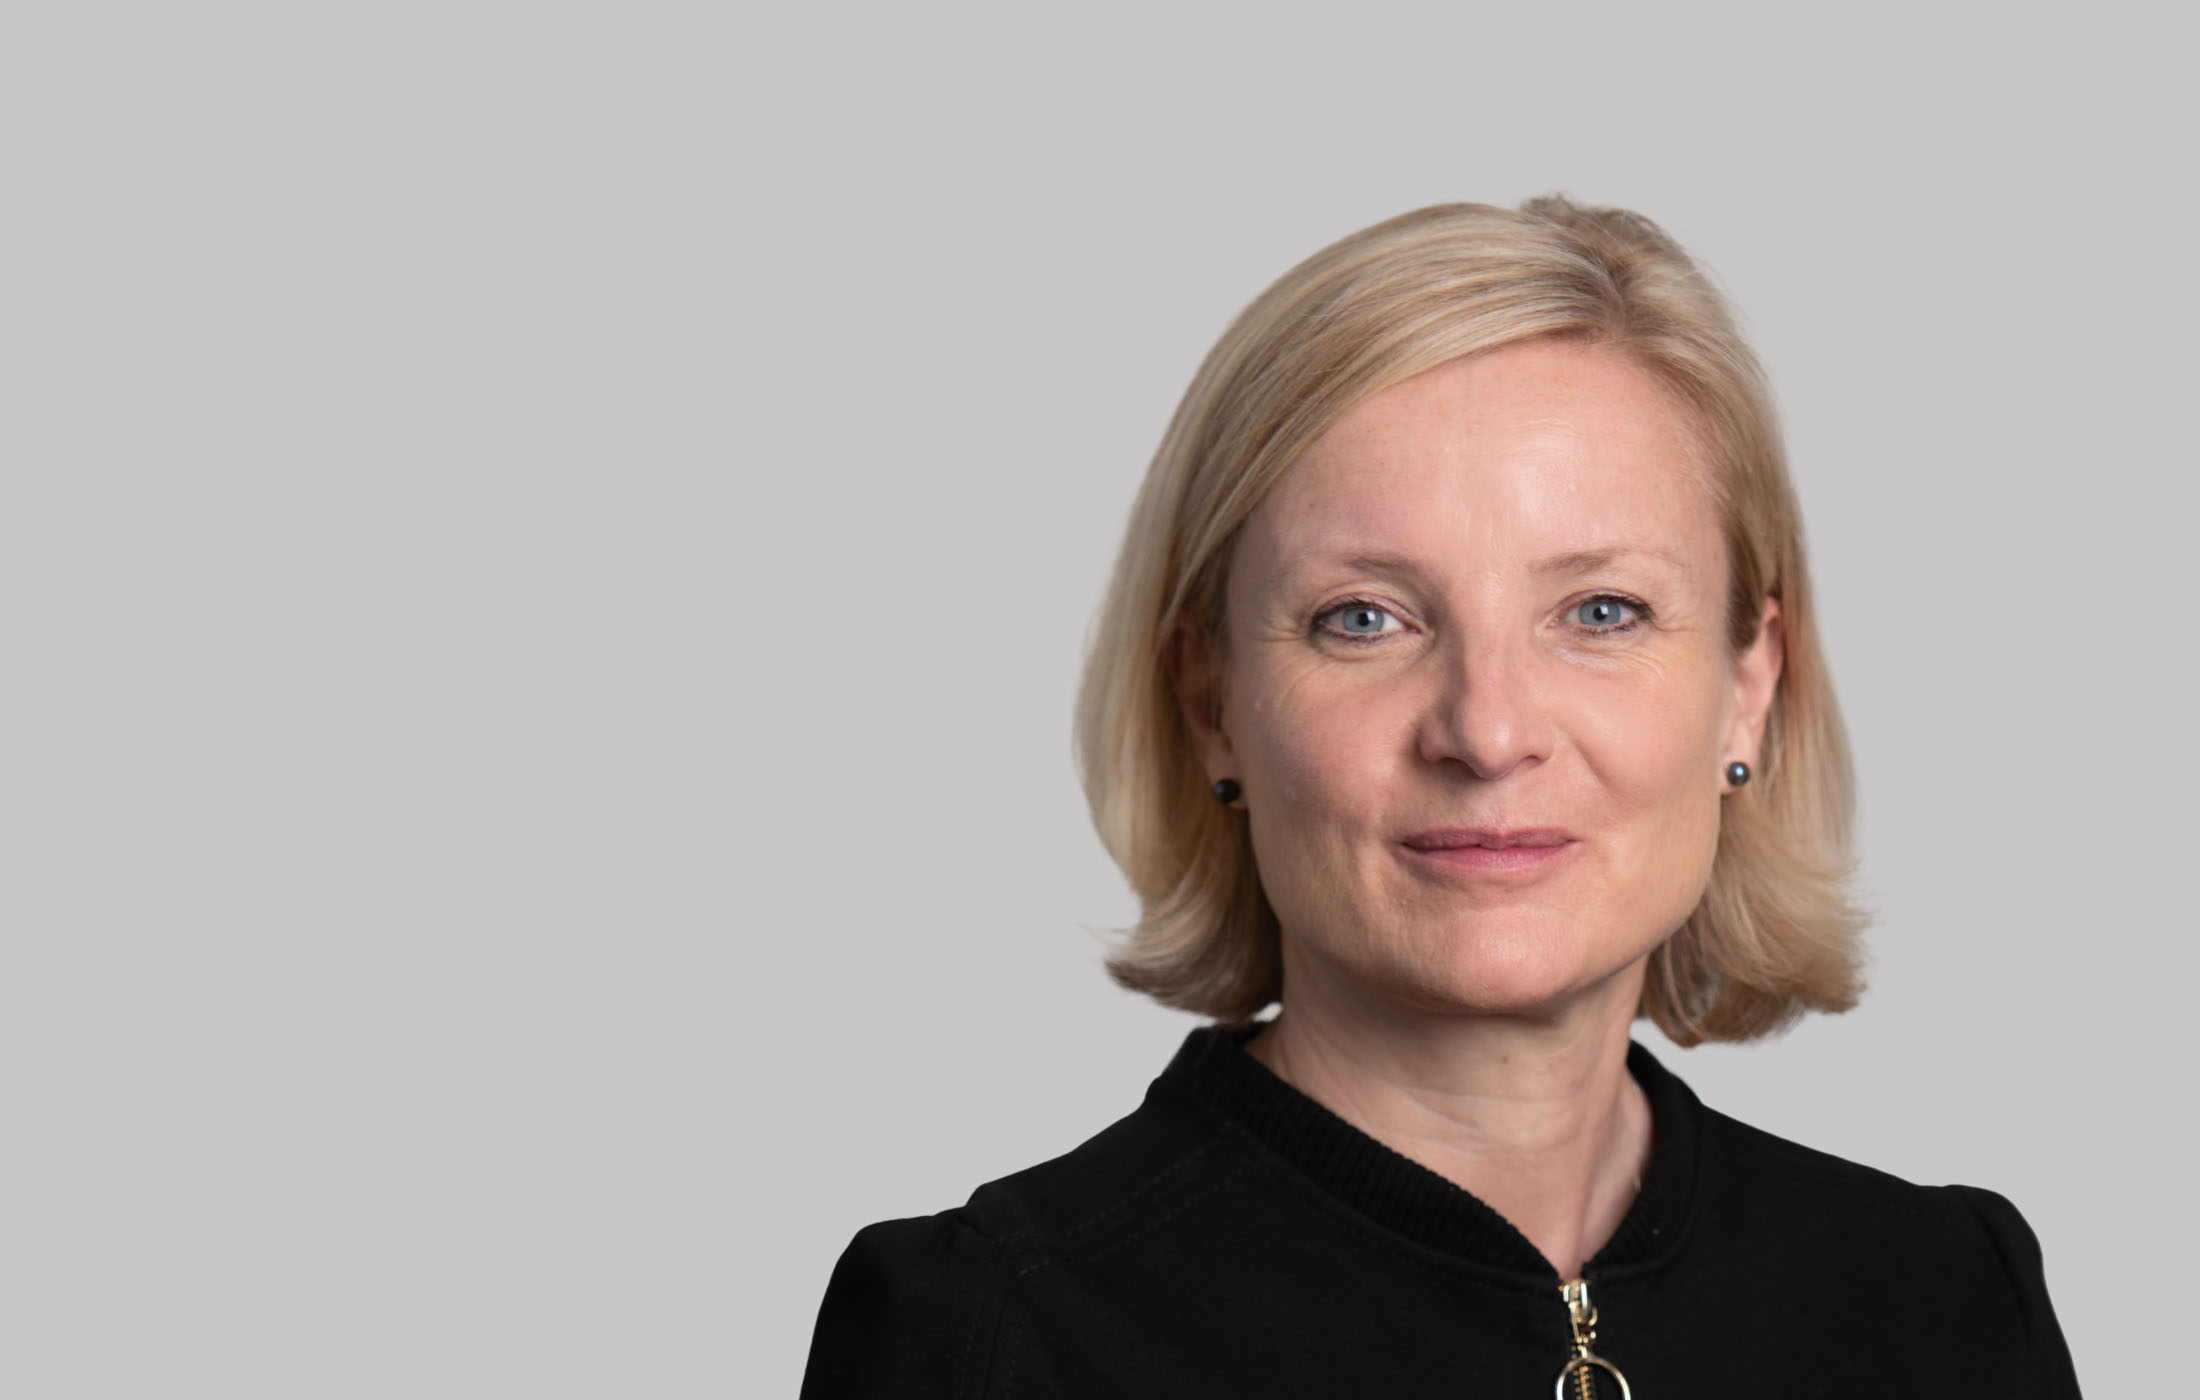 GKN Automotive expands Dr. Clare Wyatt’s role to Chief People, Communications and Sustainability Officer